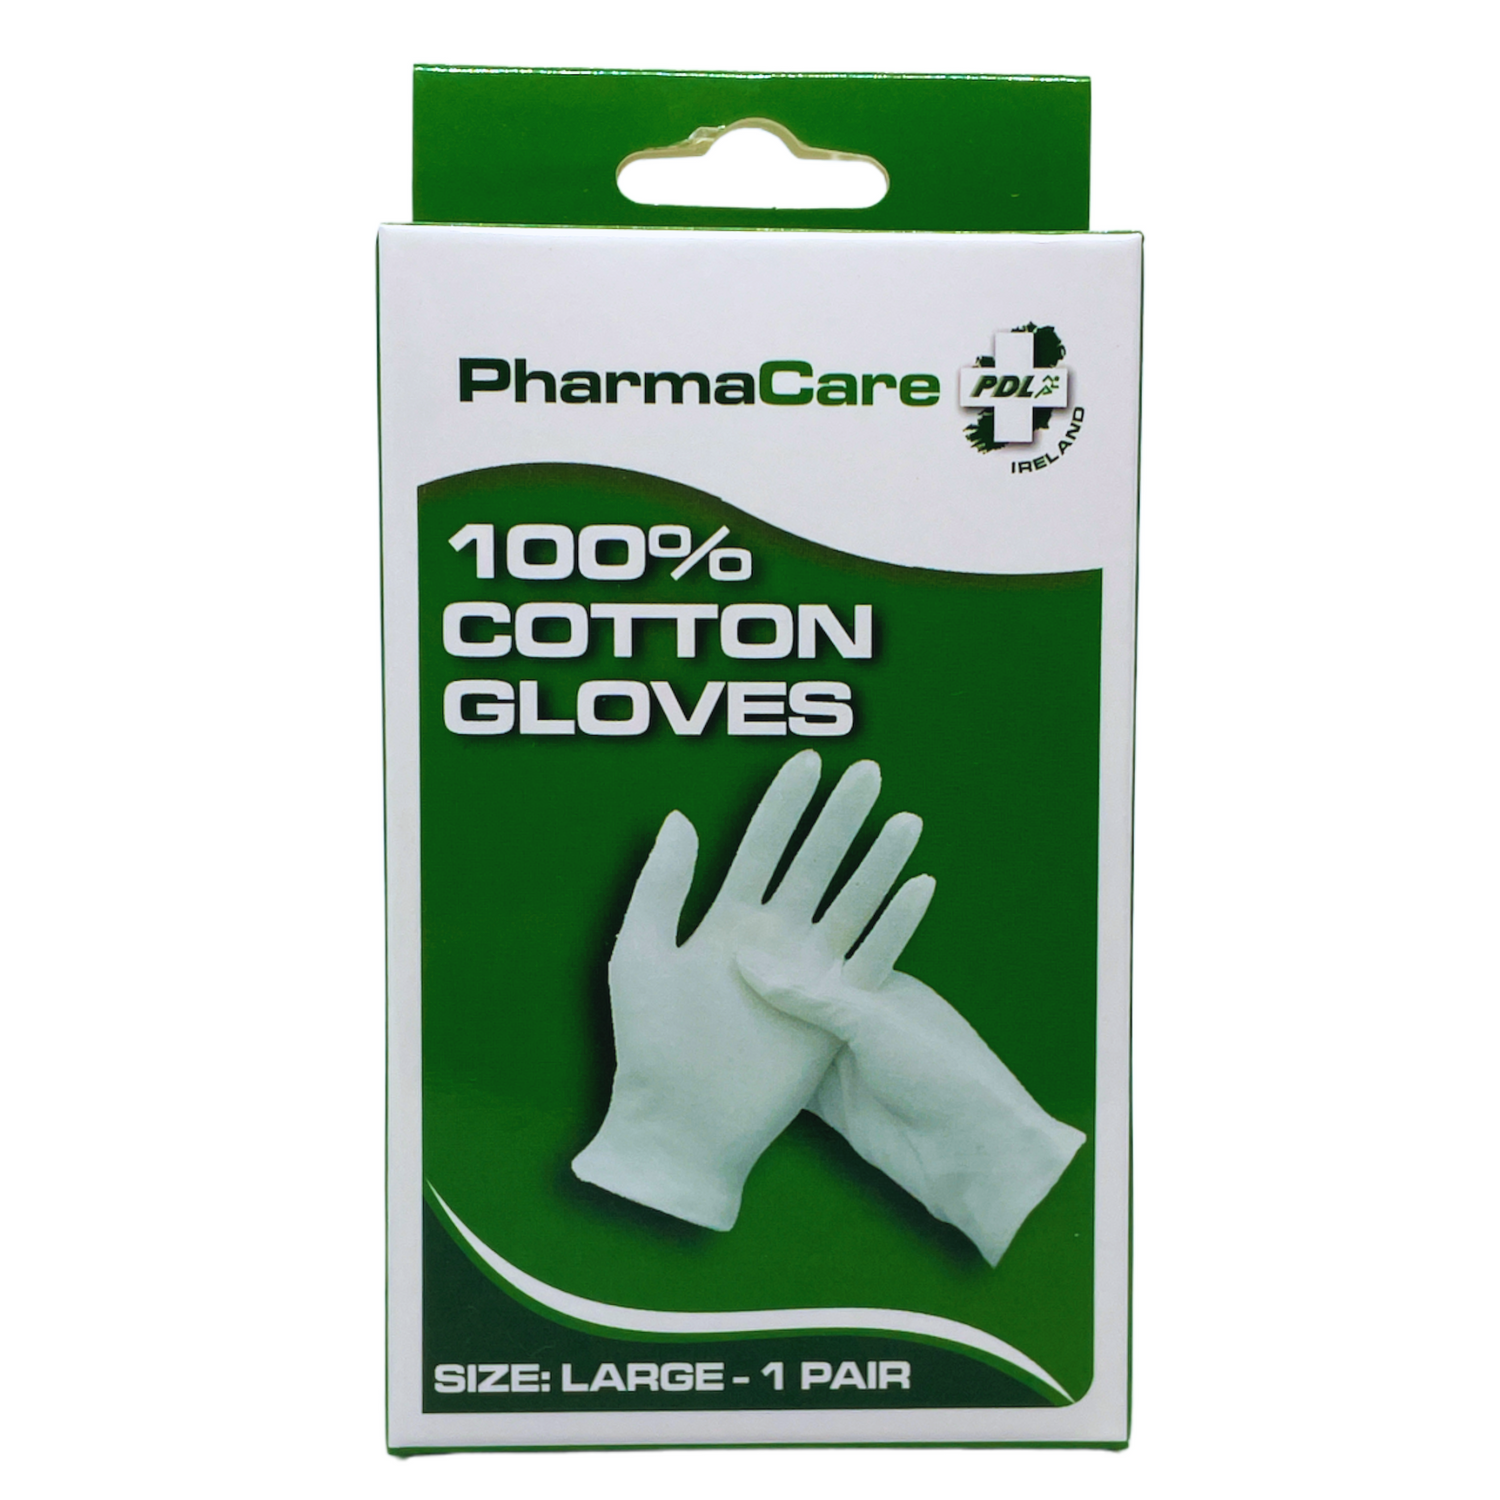 PharmaCare Cotton Gloves